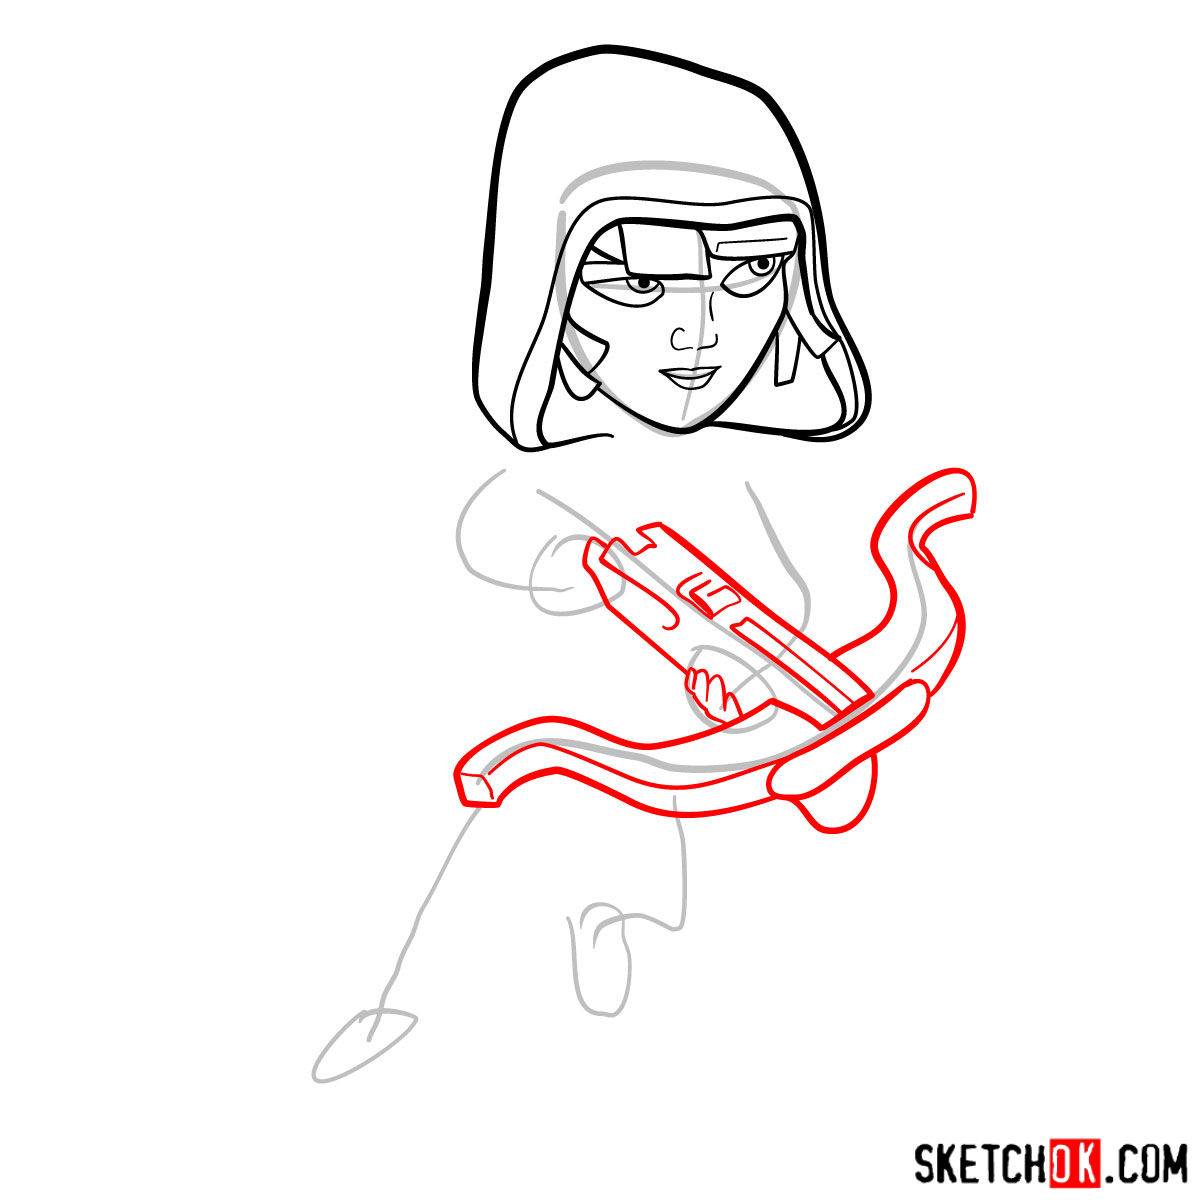 How to draw Sneaky Archer from Clash of Clans - step 04